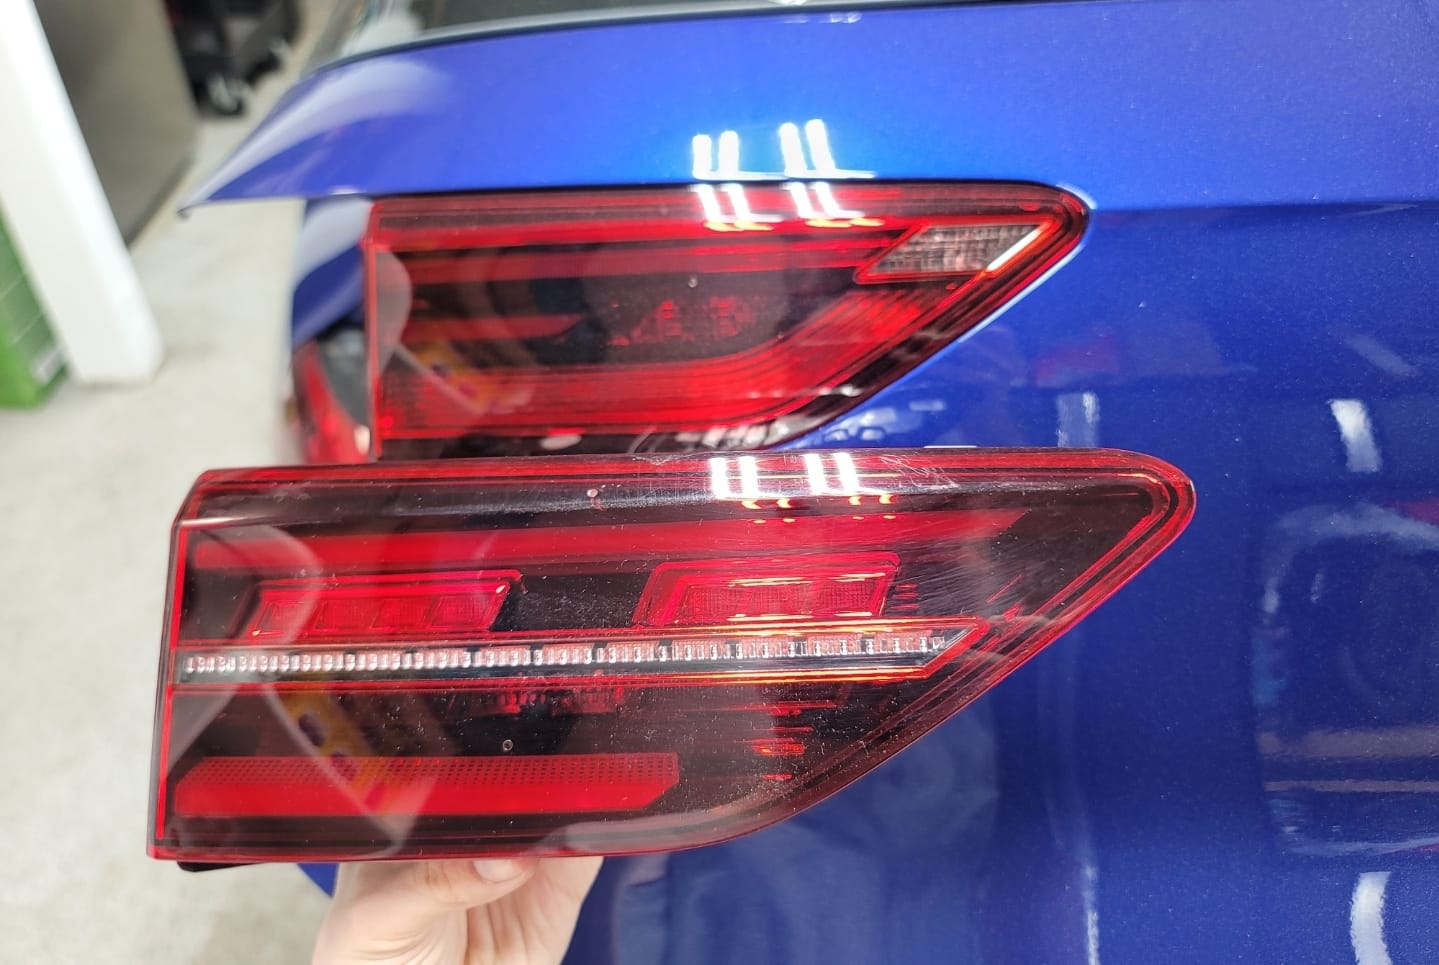 MK8 IQ Tail Lights with Direct to BCM Harness